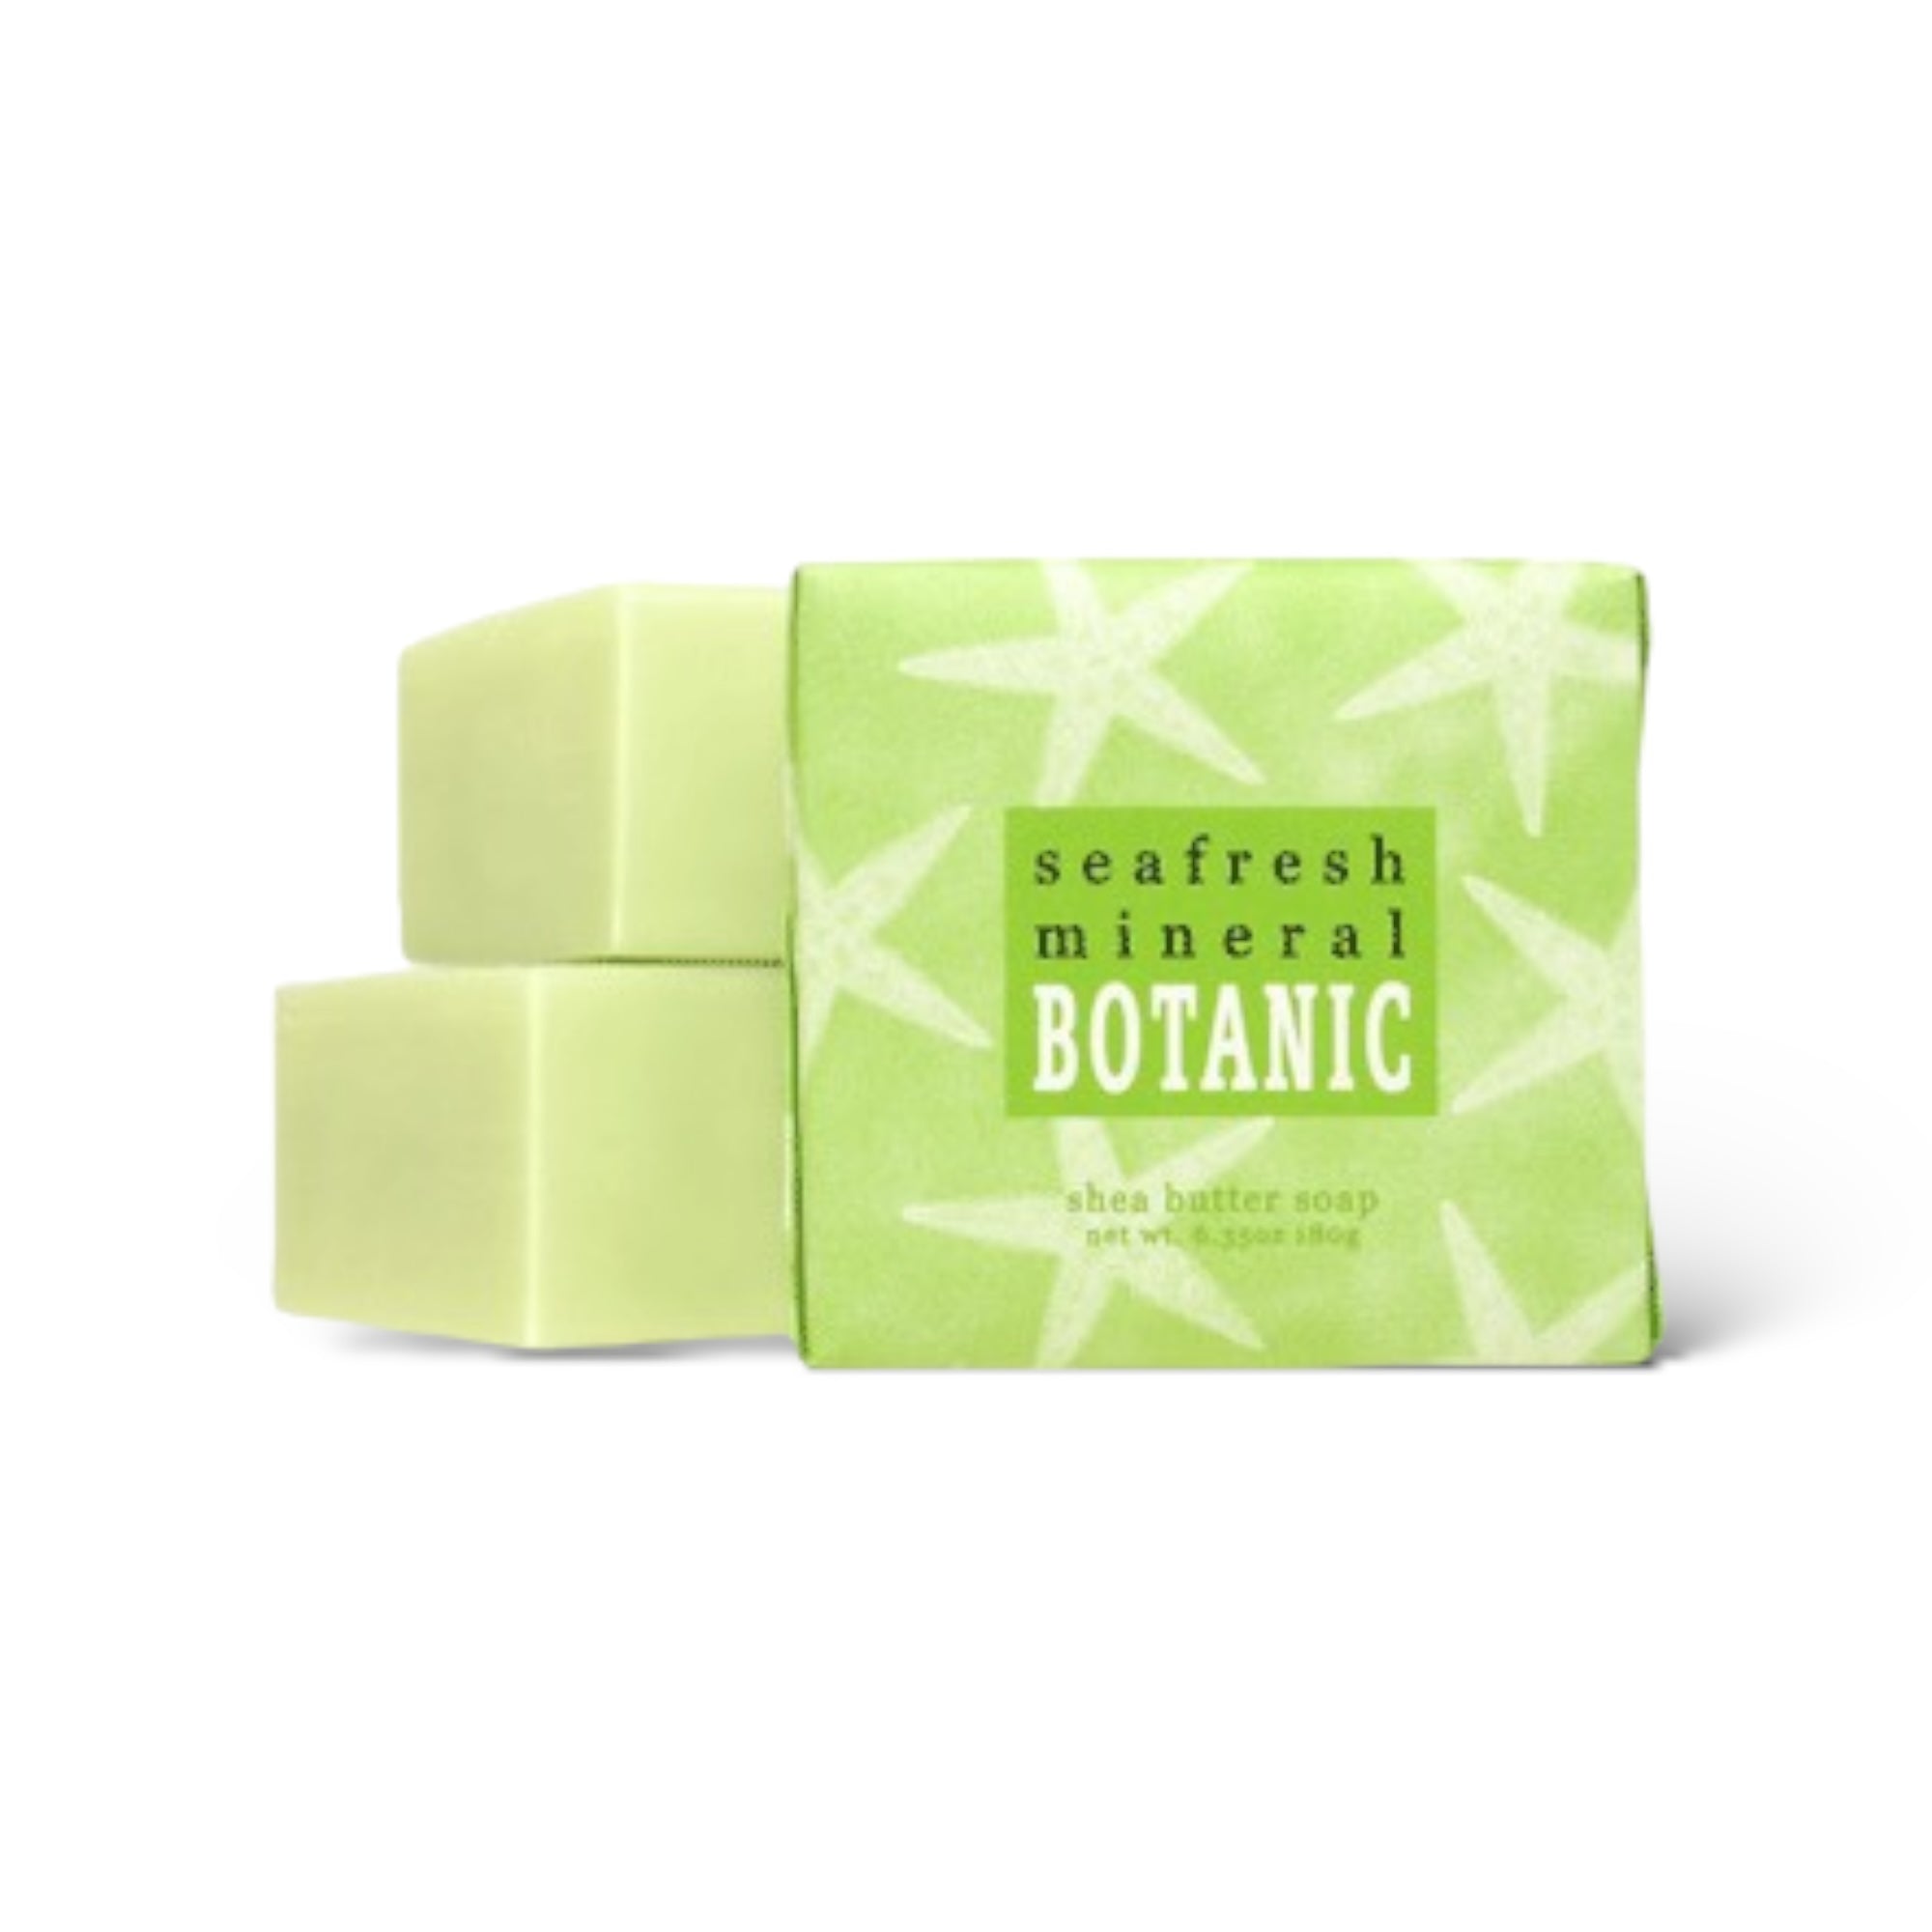 Seafresh Mineral Botanic Shea Butter Soap by Greenwich Bay Trading Co.